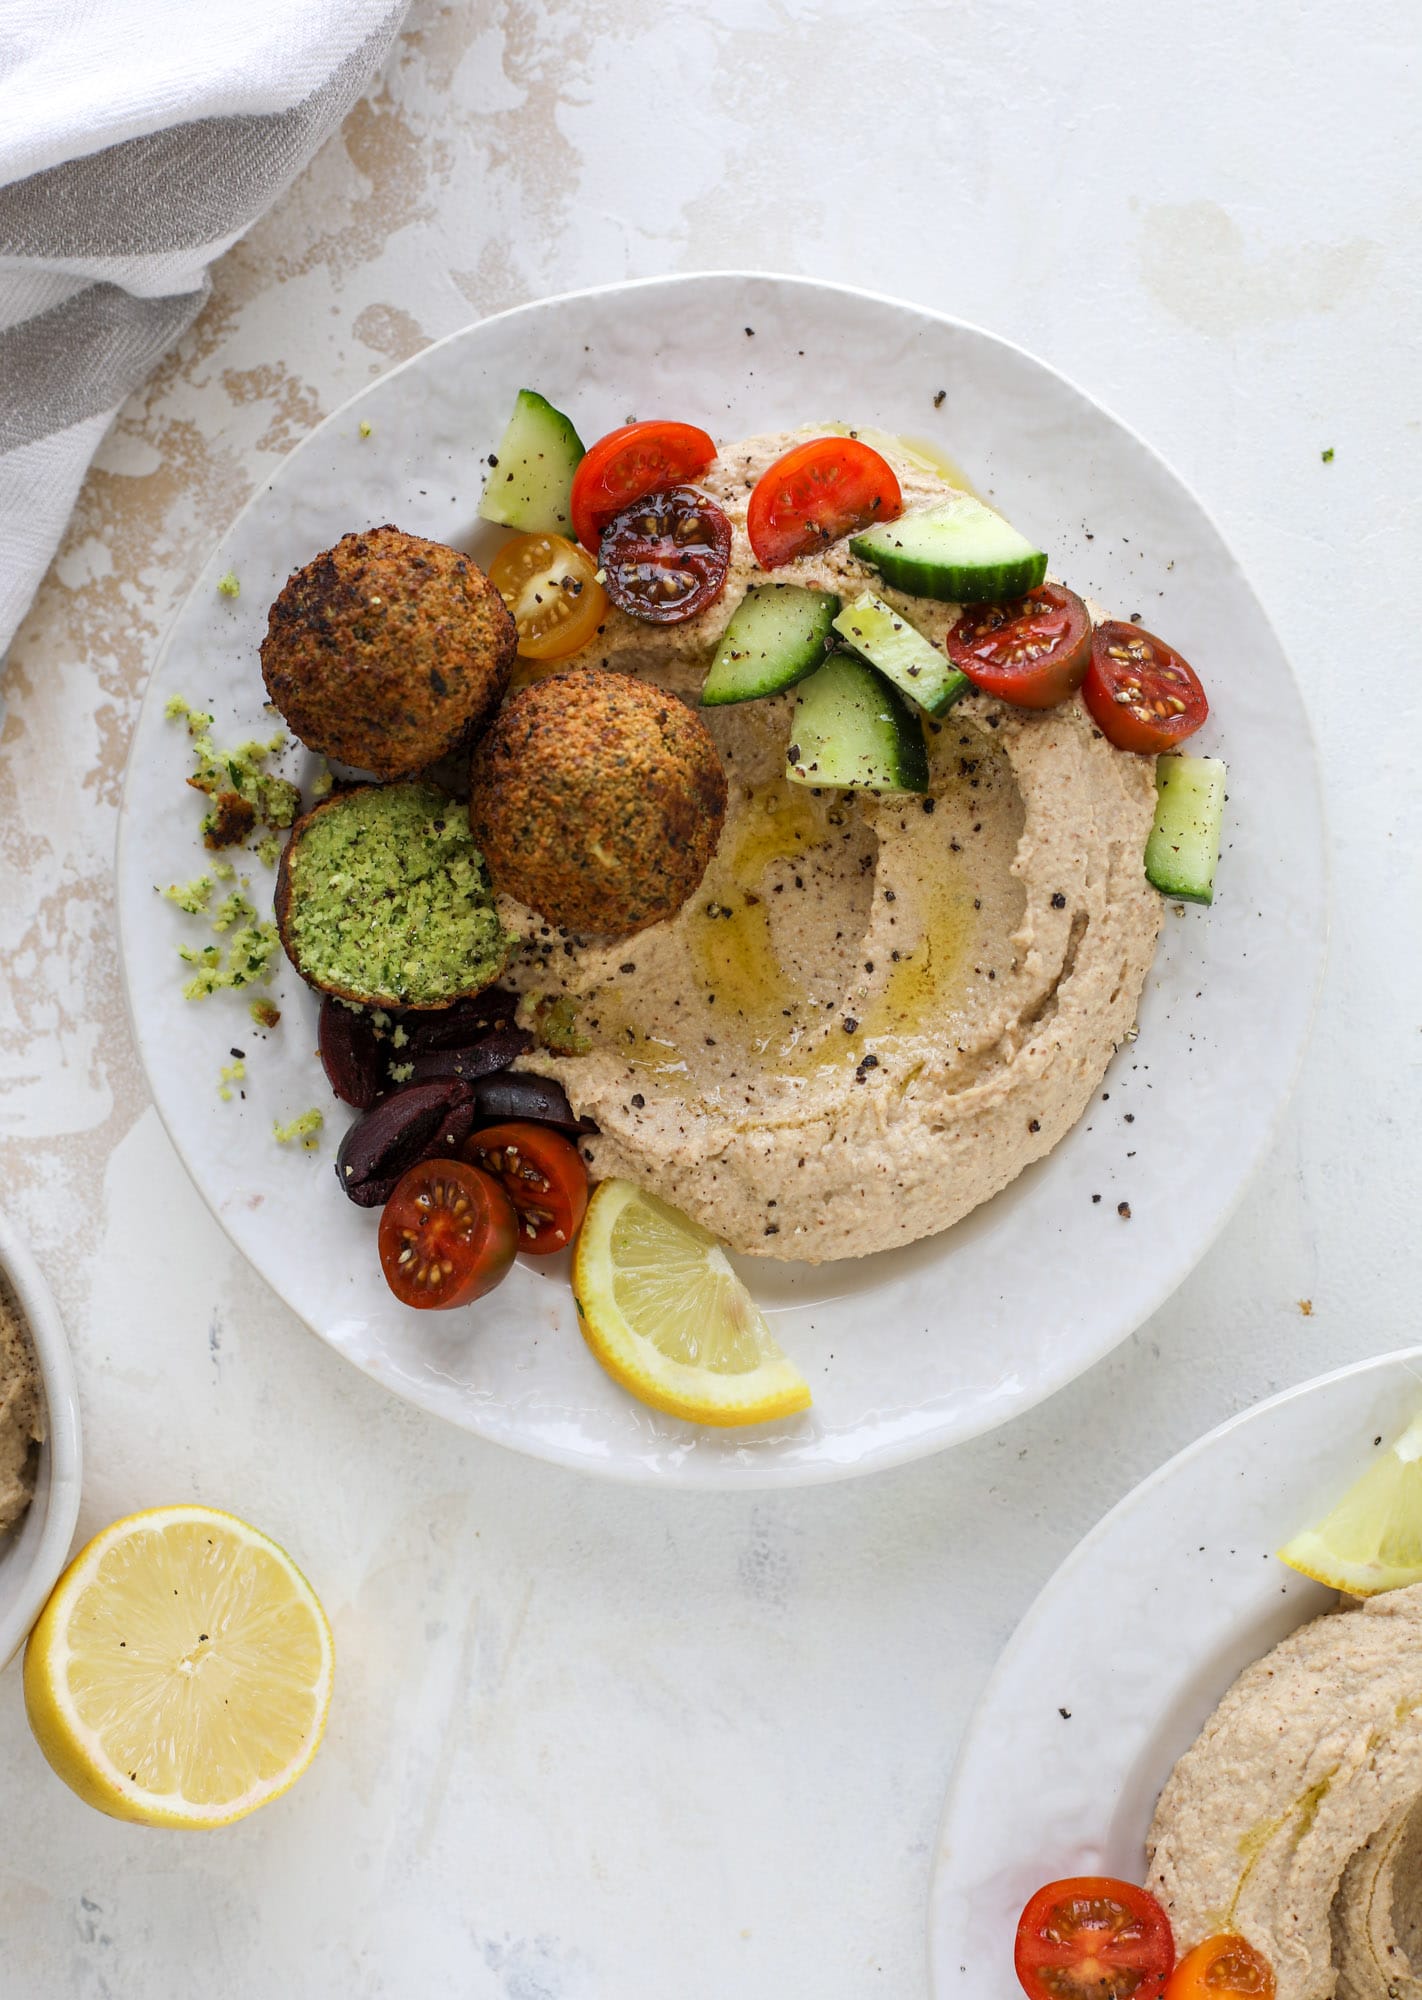 Green goddess falafel is hearty and flavorful, served over the creamiest cauliflower hummus, with tomatoes, olive, cucumbers and feta. Yum! I howsweeteats.com #falafel #cauliflowerhummus